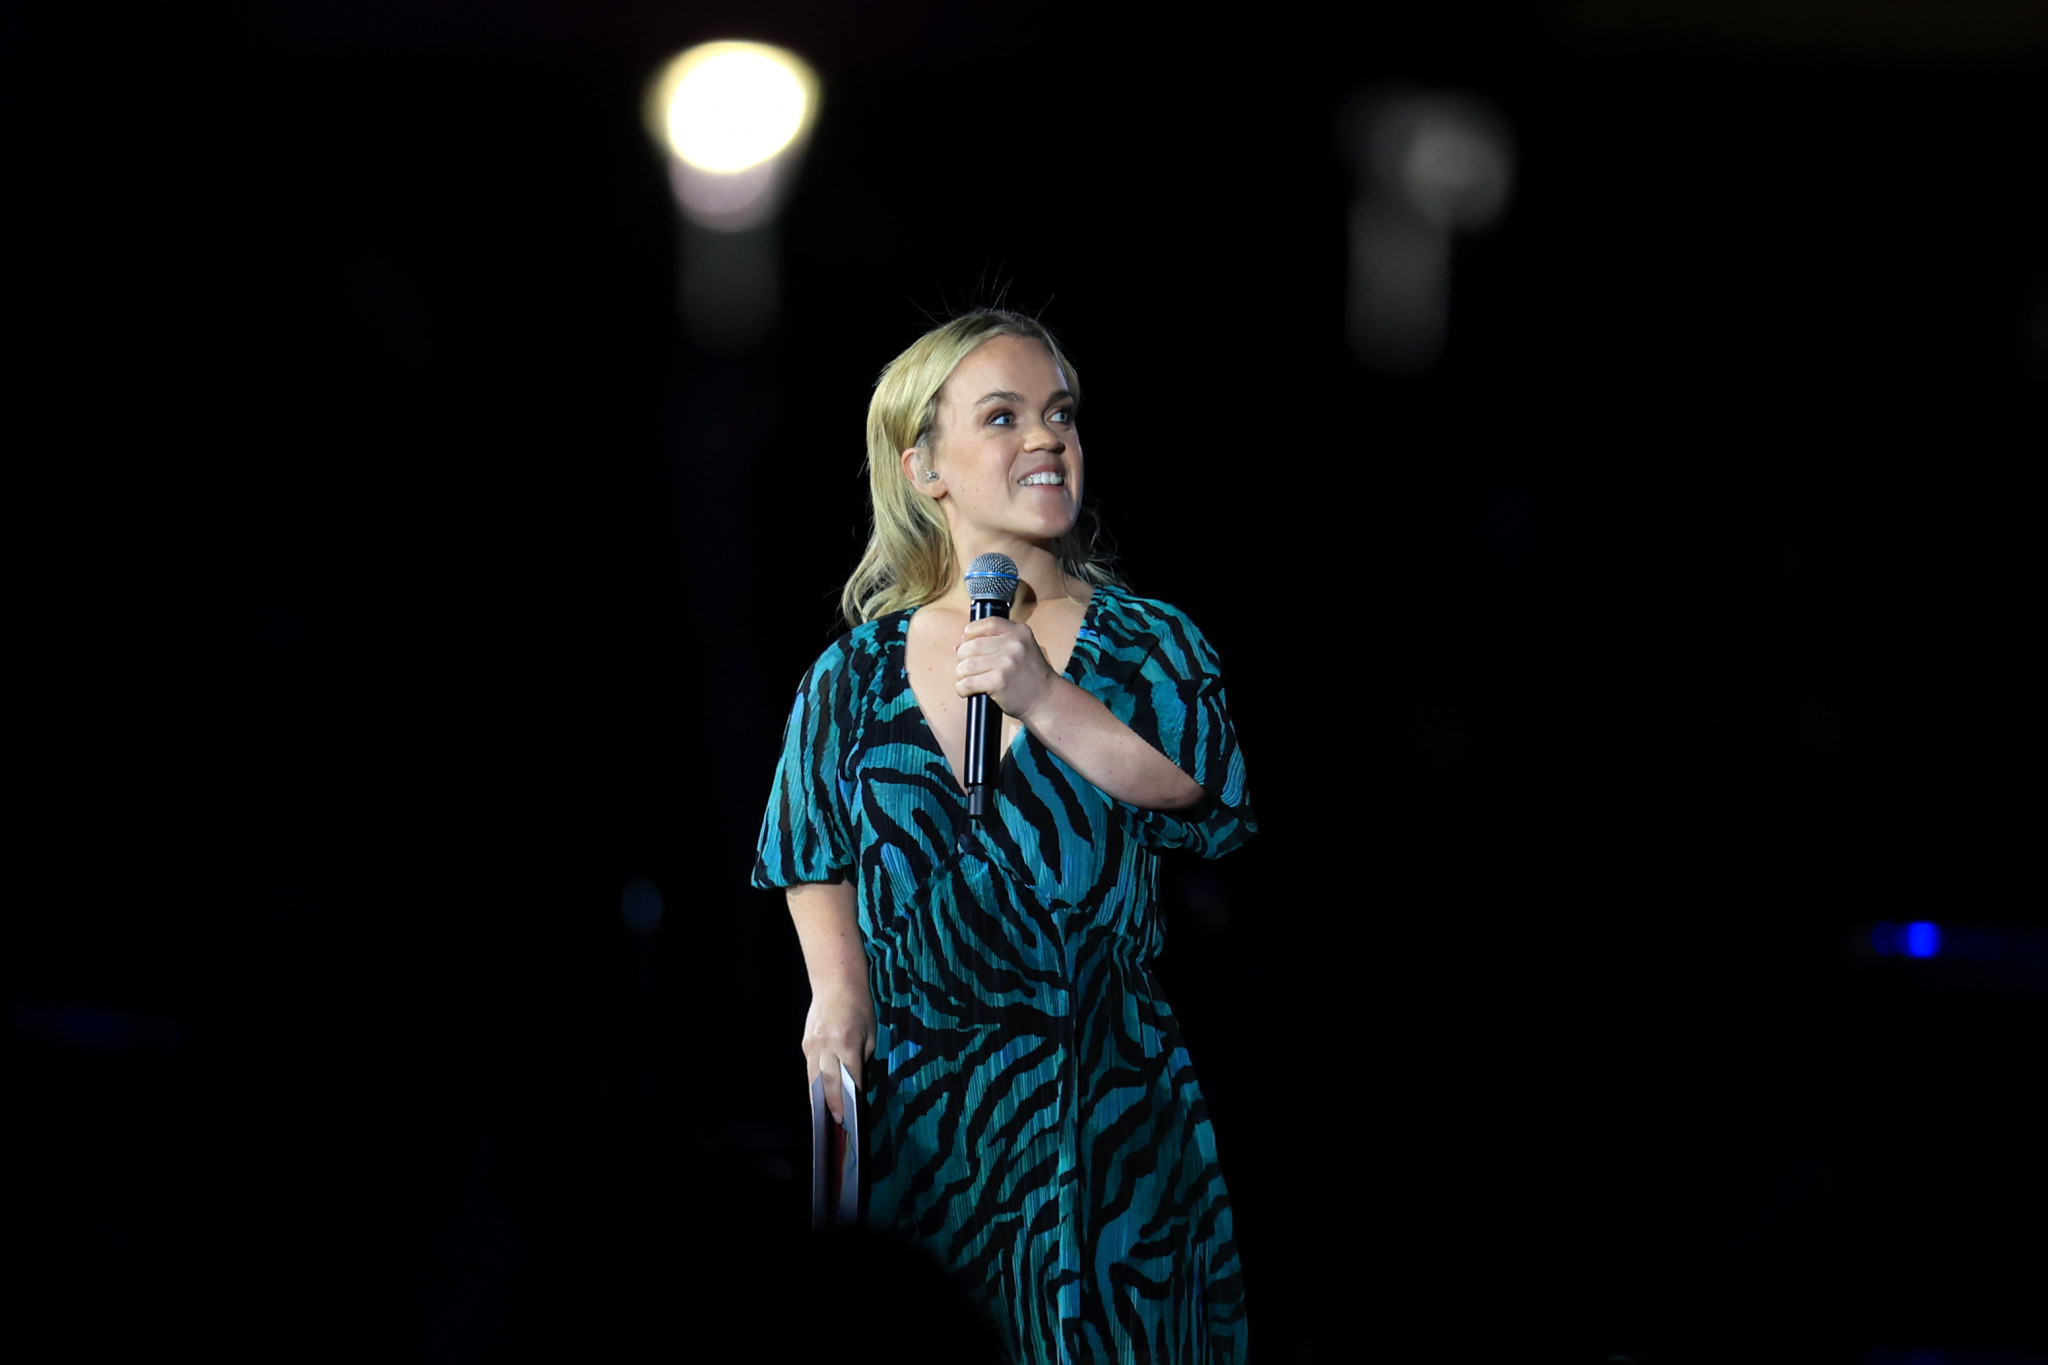 Ellie SImmonds made an appeal on behalf of Sport Aid at the Closing Ceremony ©Getty Images